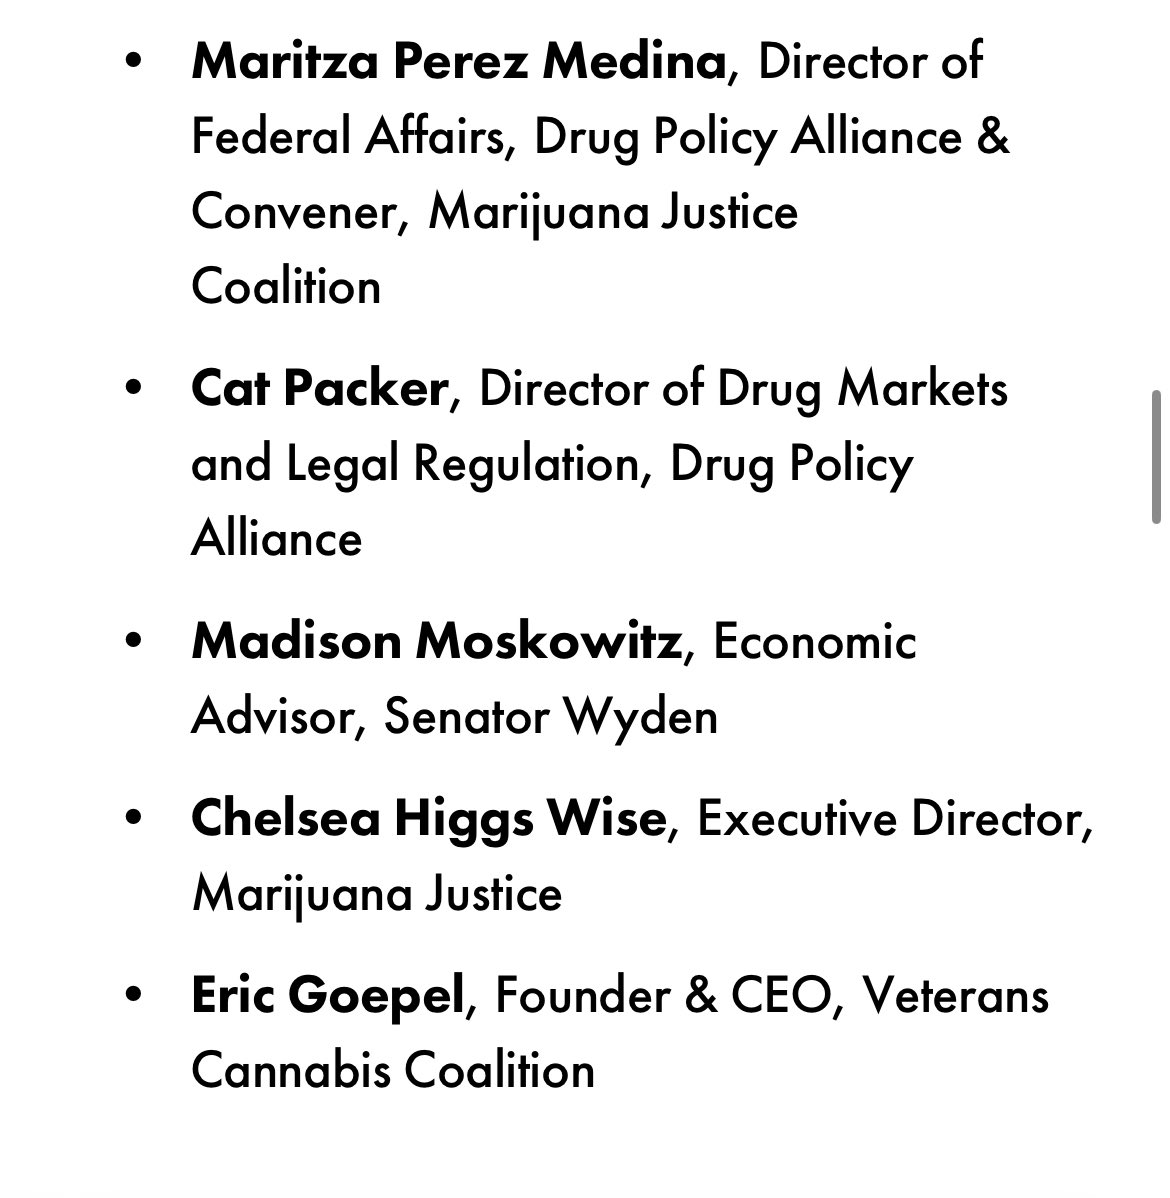 Thrilled to be speaking at the @NatlCannaFest National Cannabis Festival tomorrow about federal marijuana reform, w @MariPerMed @cat_packer @ChelseaWiseRVA & @EricGoepel. Panel at 3:45pm! Come check it out! #legalizeit #decrimnow